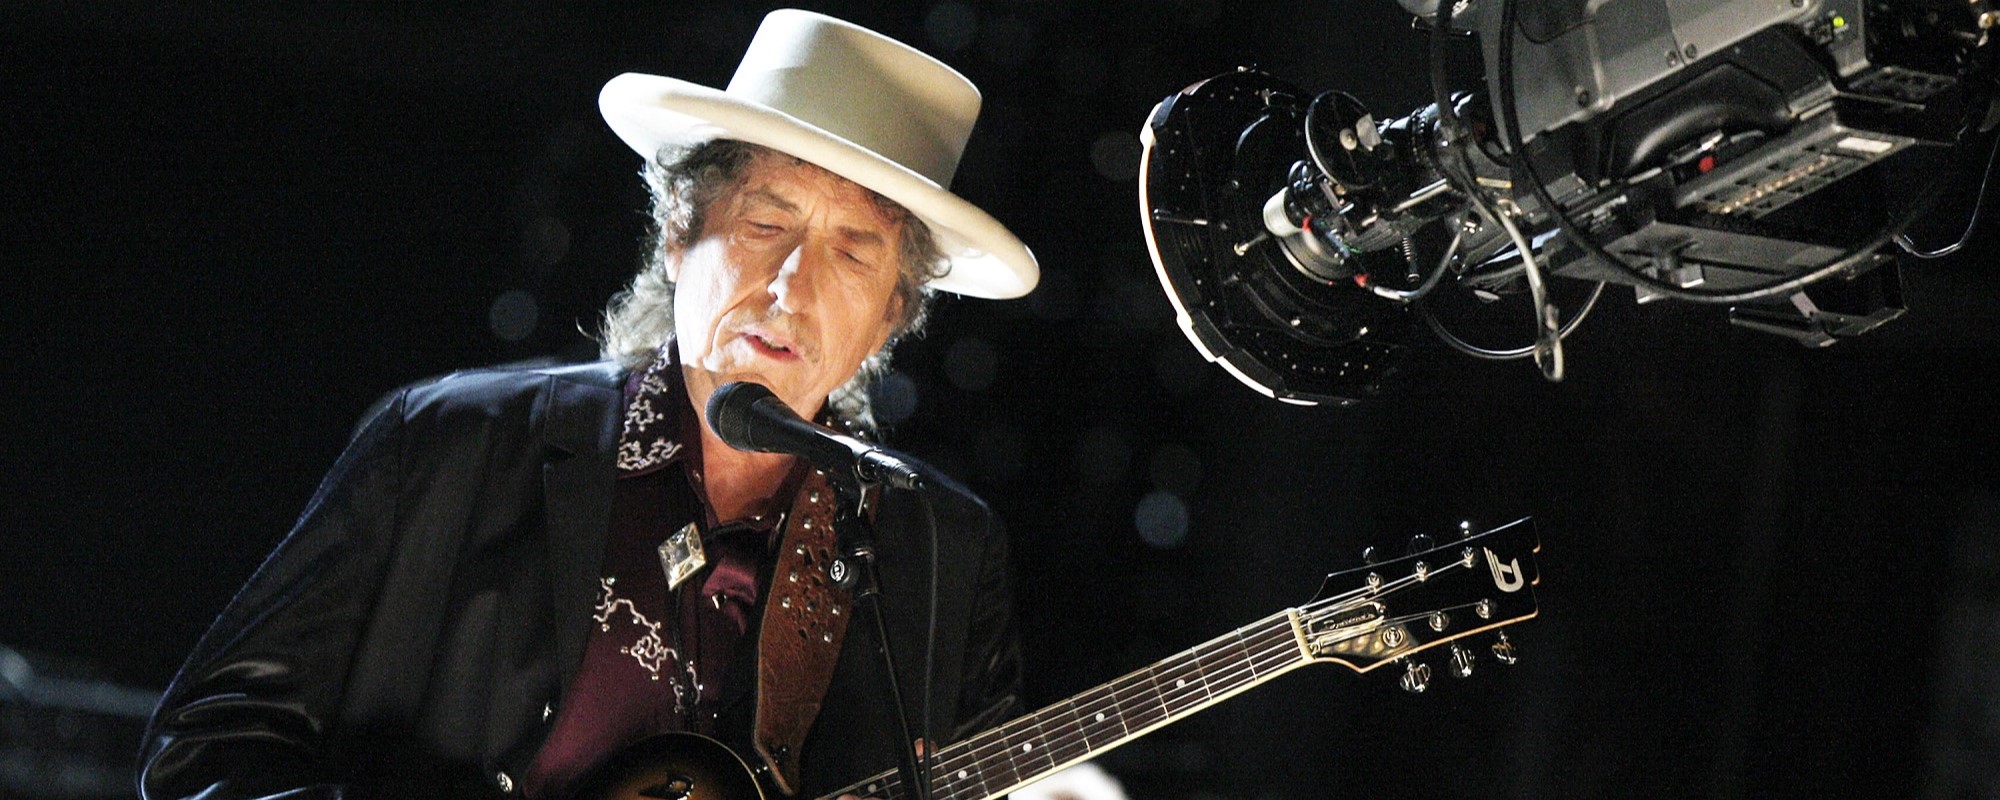 Remember When Bob Dylan Topped the ‘Billboard’ 200 for the Fifth Time & Set a Chart Record with ‘Together Through Life’